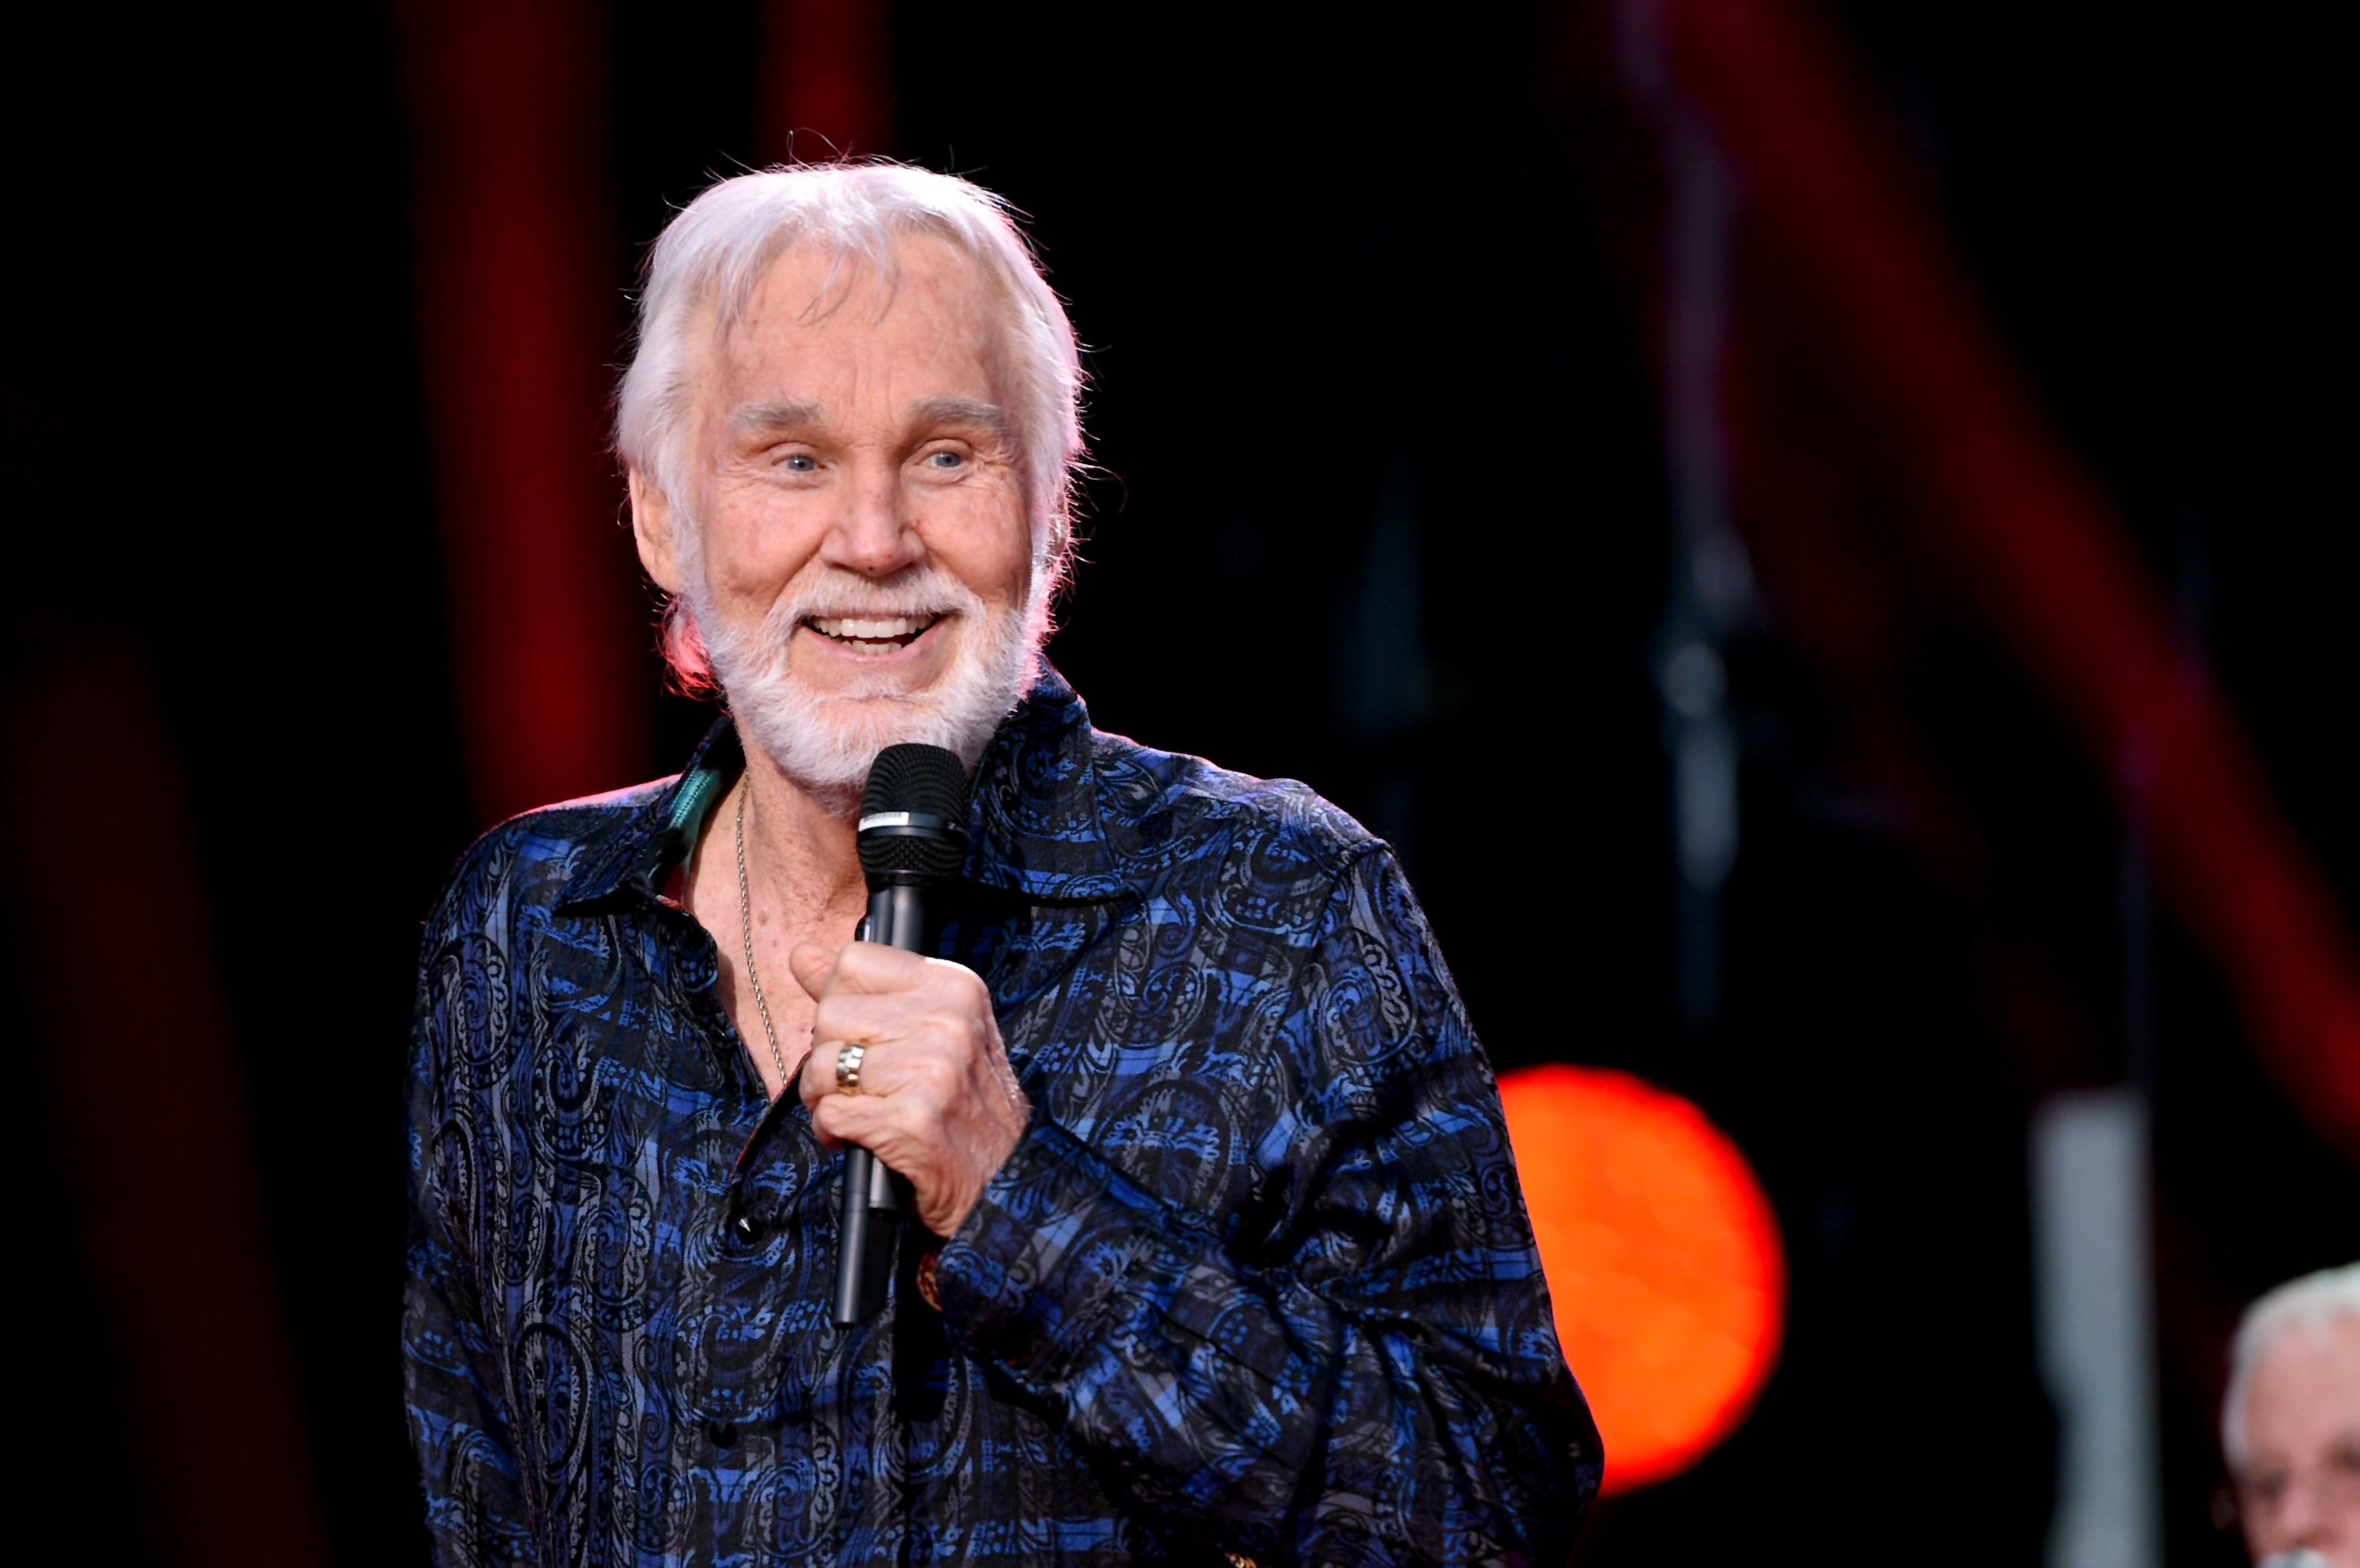 kenny rogers through the years similar songs